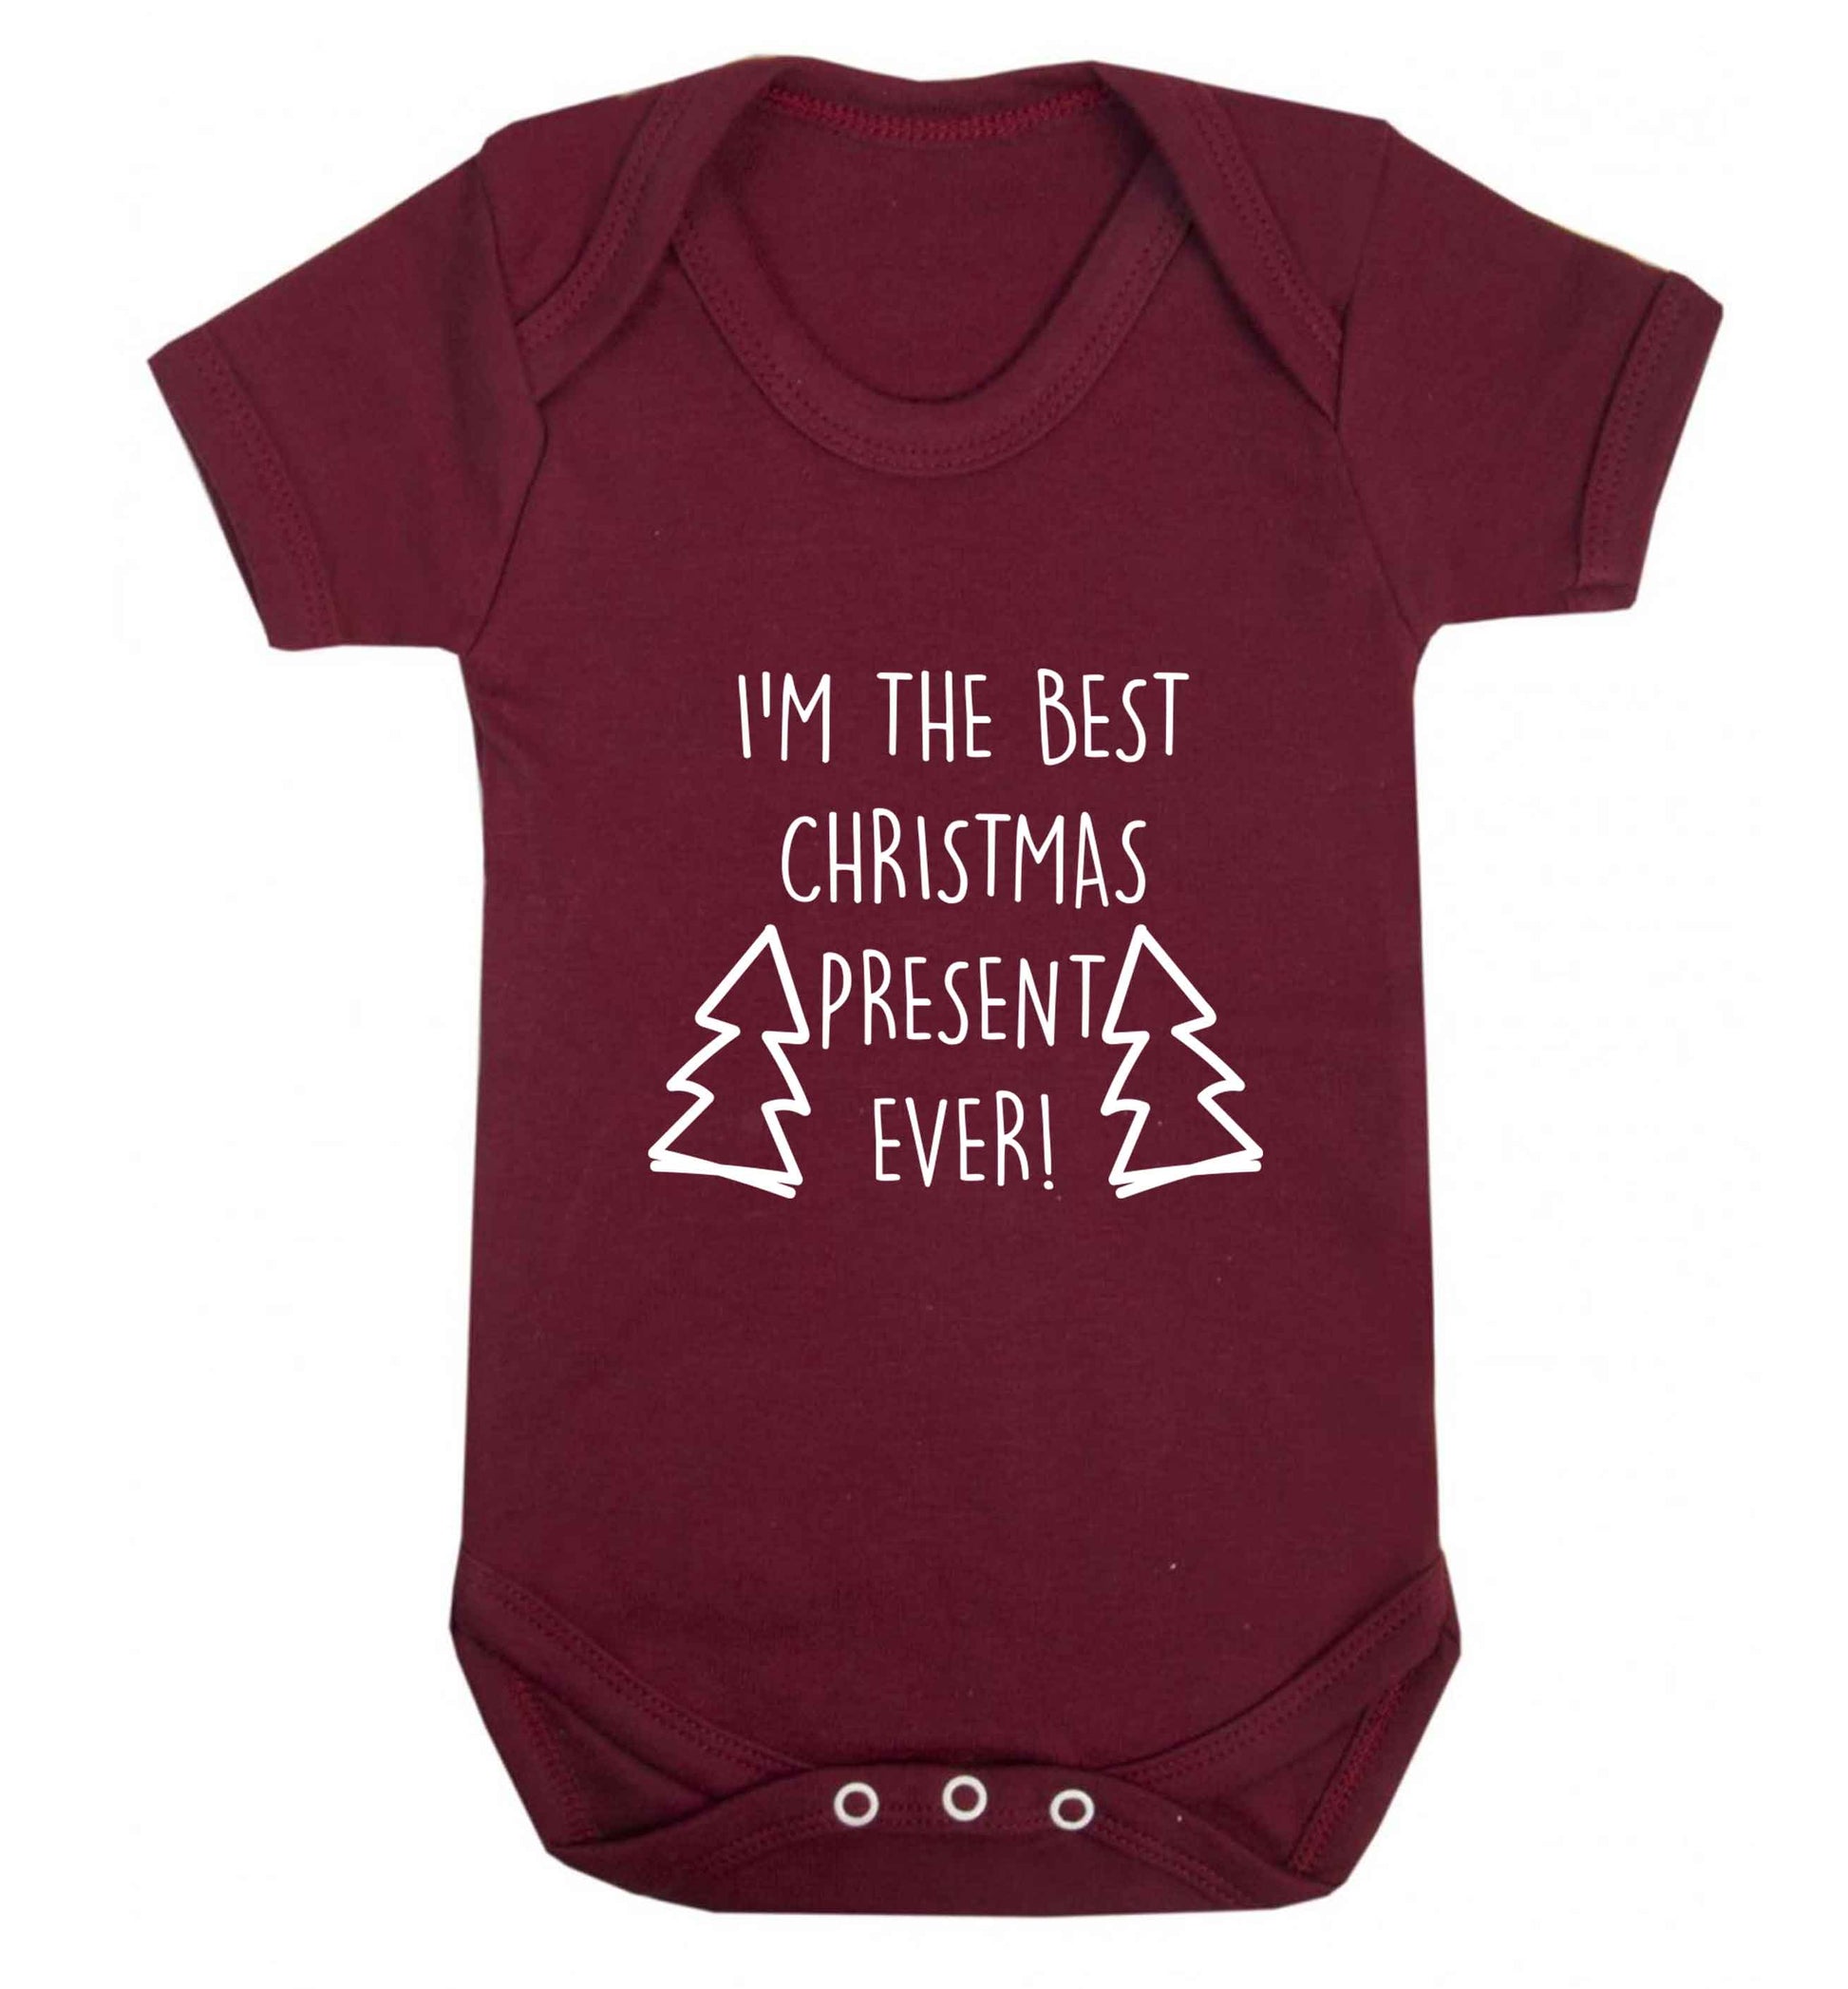 I'm the best Christmas present ever baby vest maroon 18-24 months